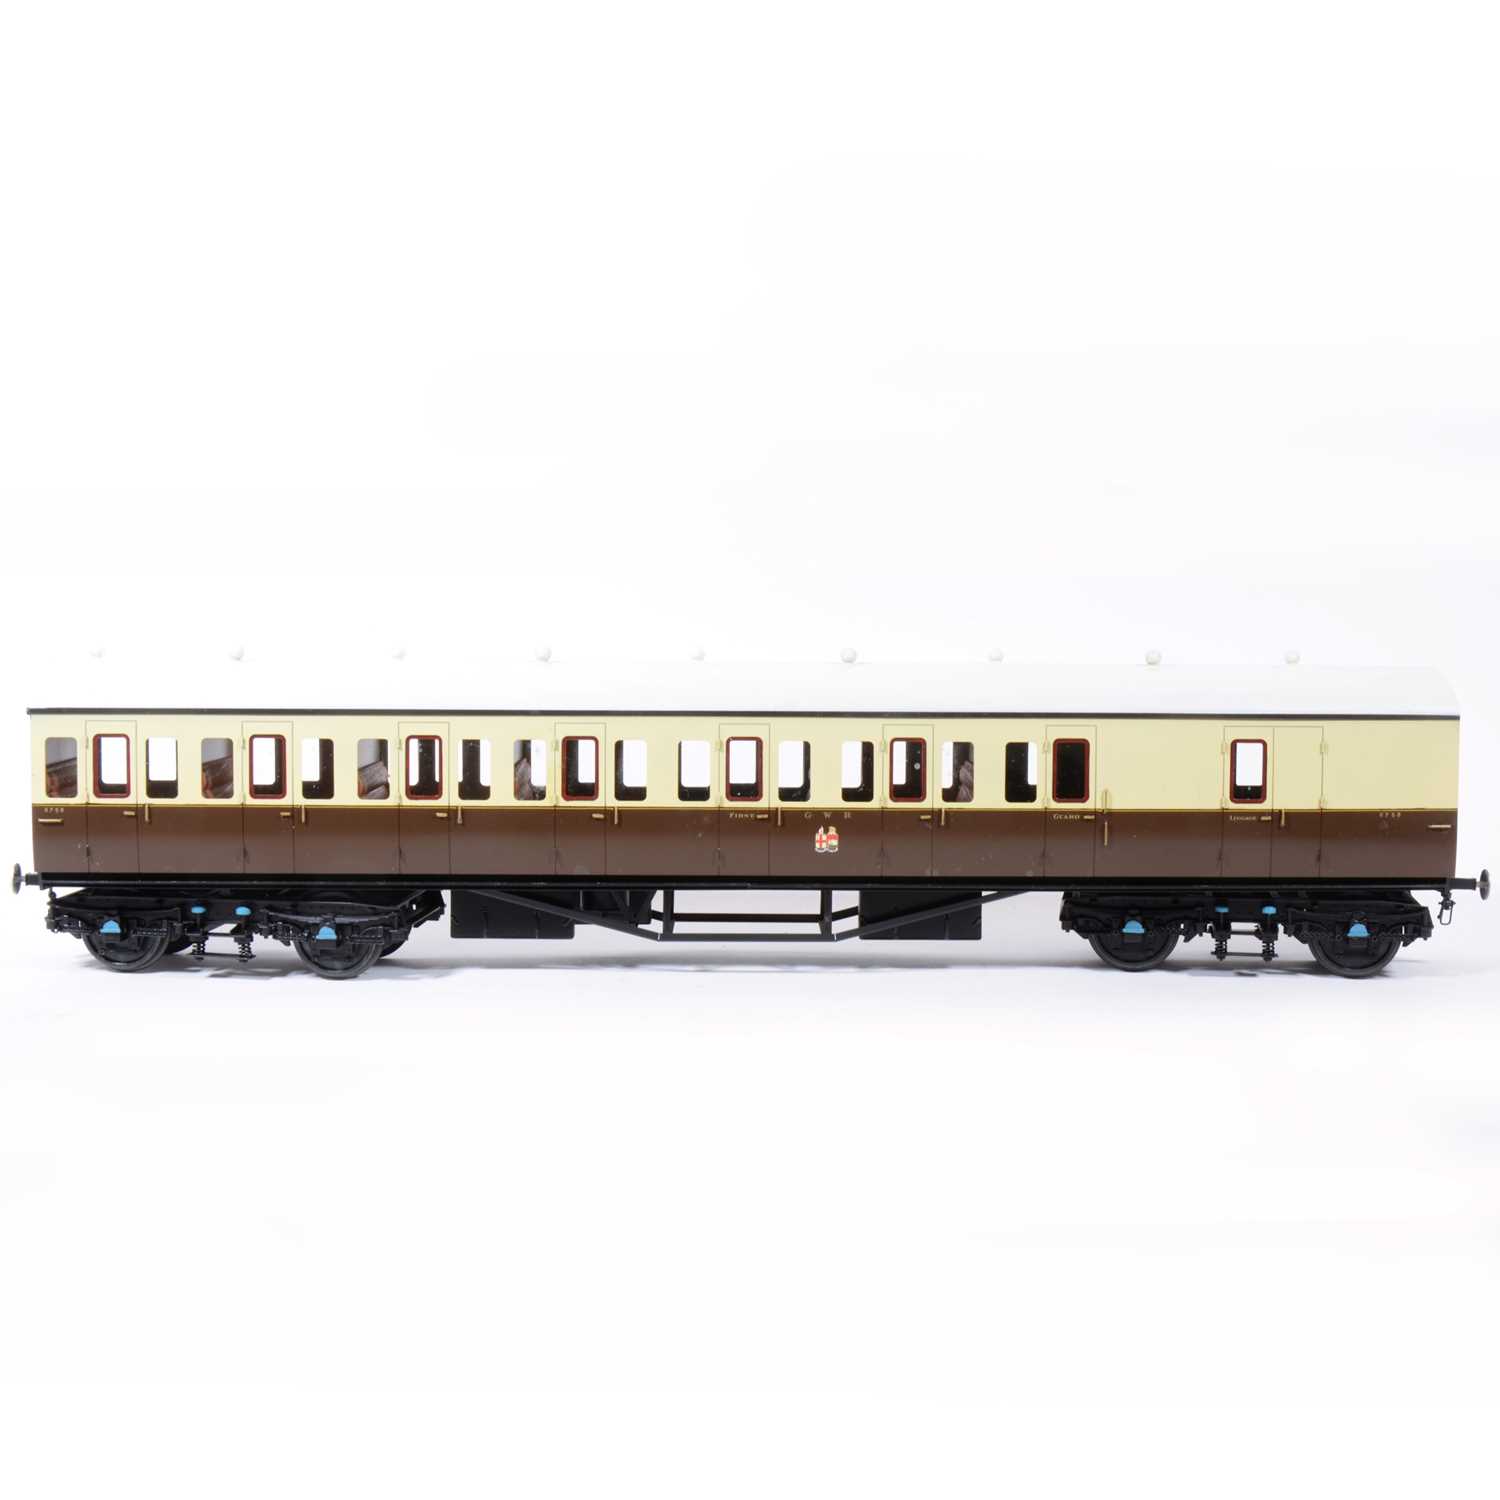 Lot 78 - Two Tower Brass Models, gauge 1 / G scale, 45mm passenger coaches, GWR brown and cream, no.6757, no.6758, (2).